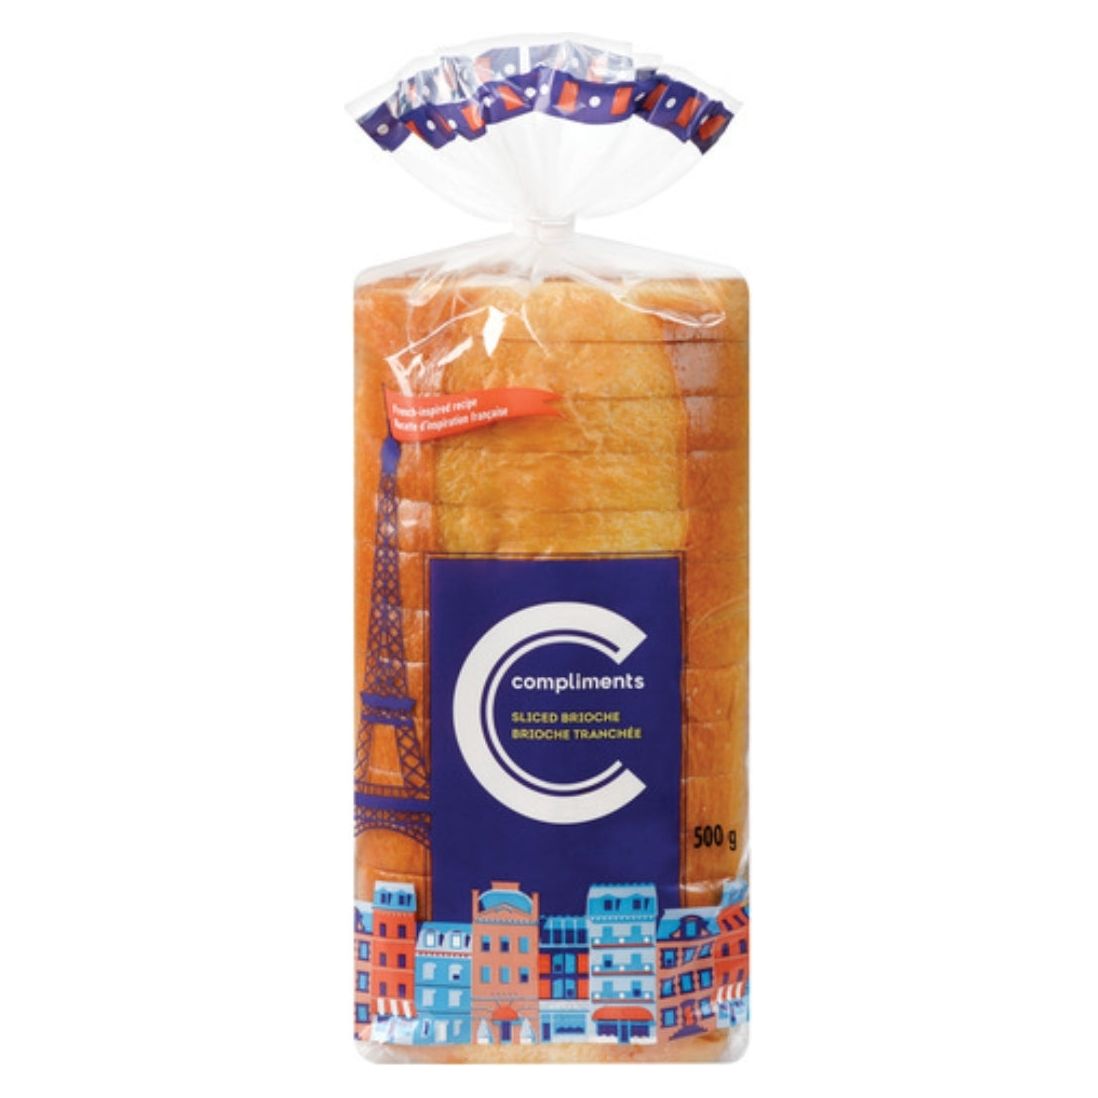 Compliments Sliced Brioche Bread Loaf 500g